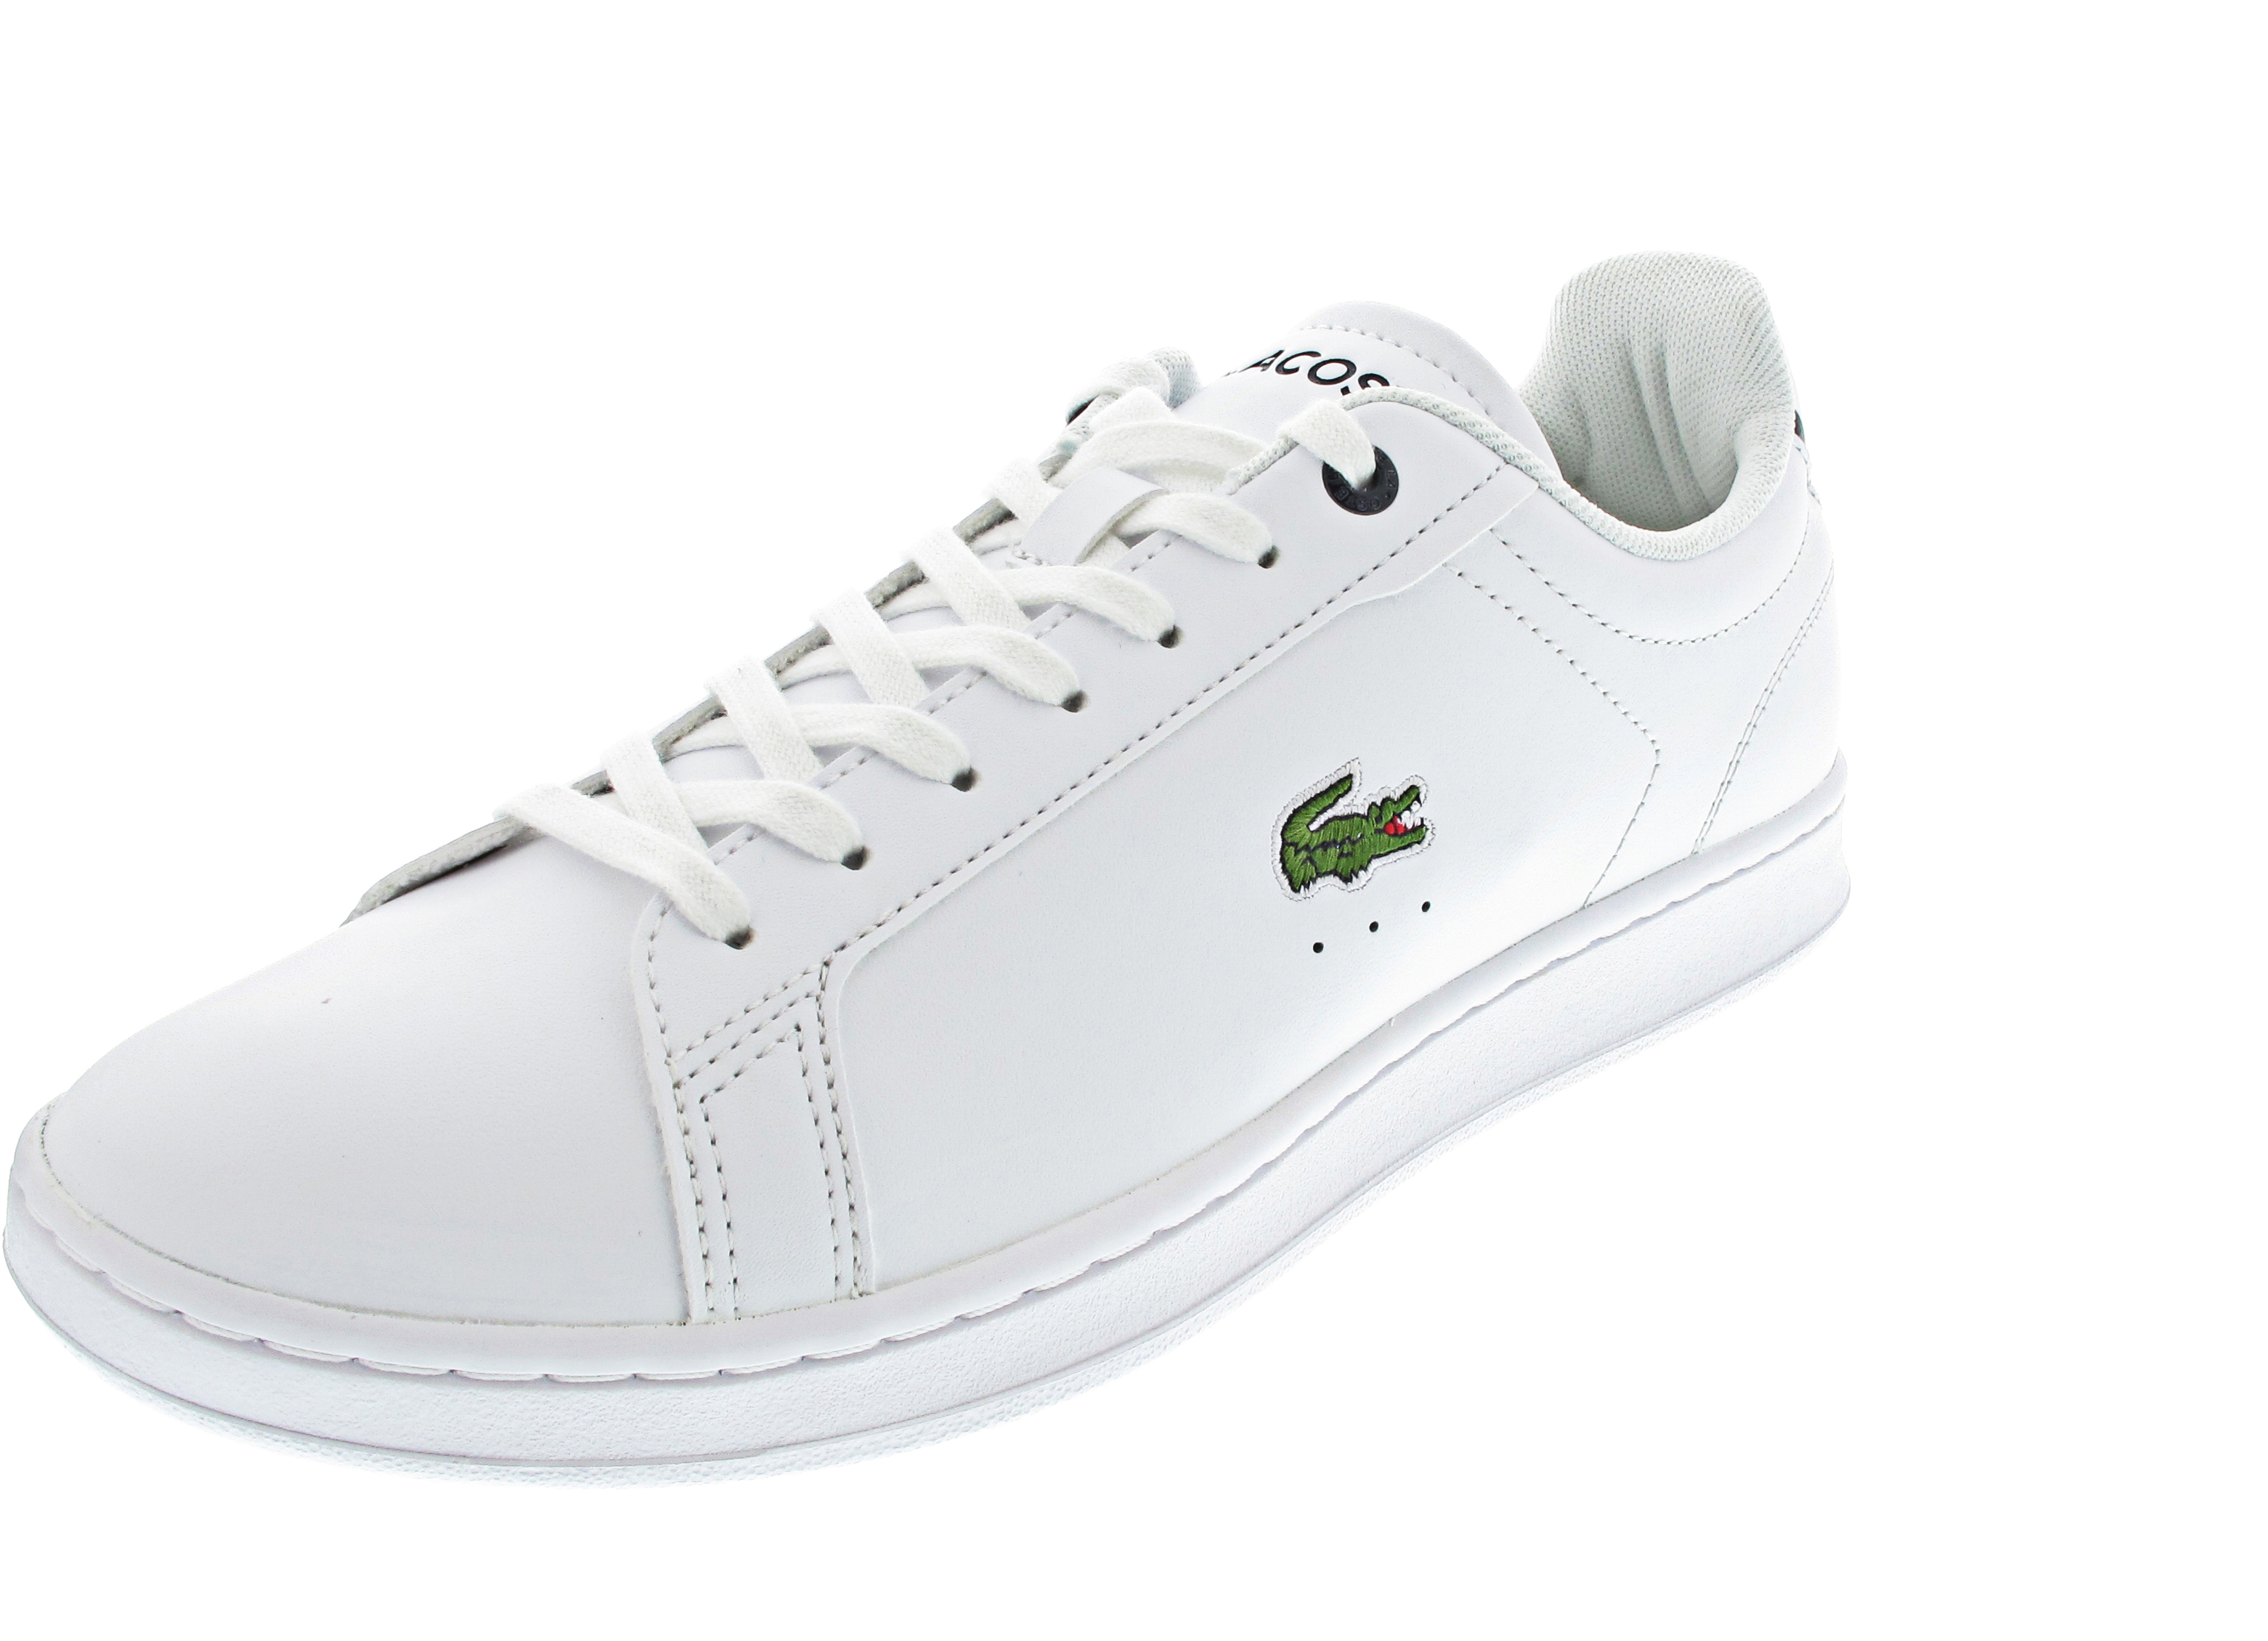 Lacoste Carnaby Pro BL Leather